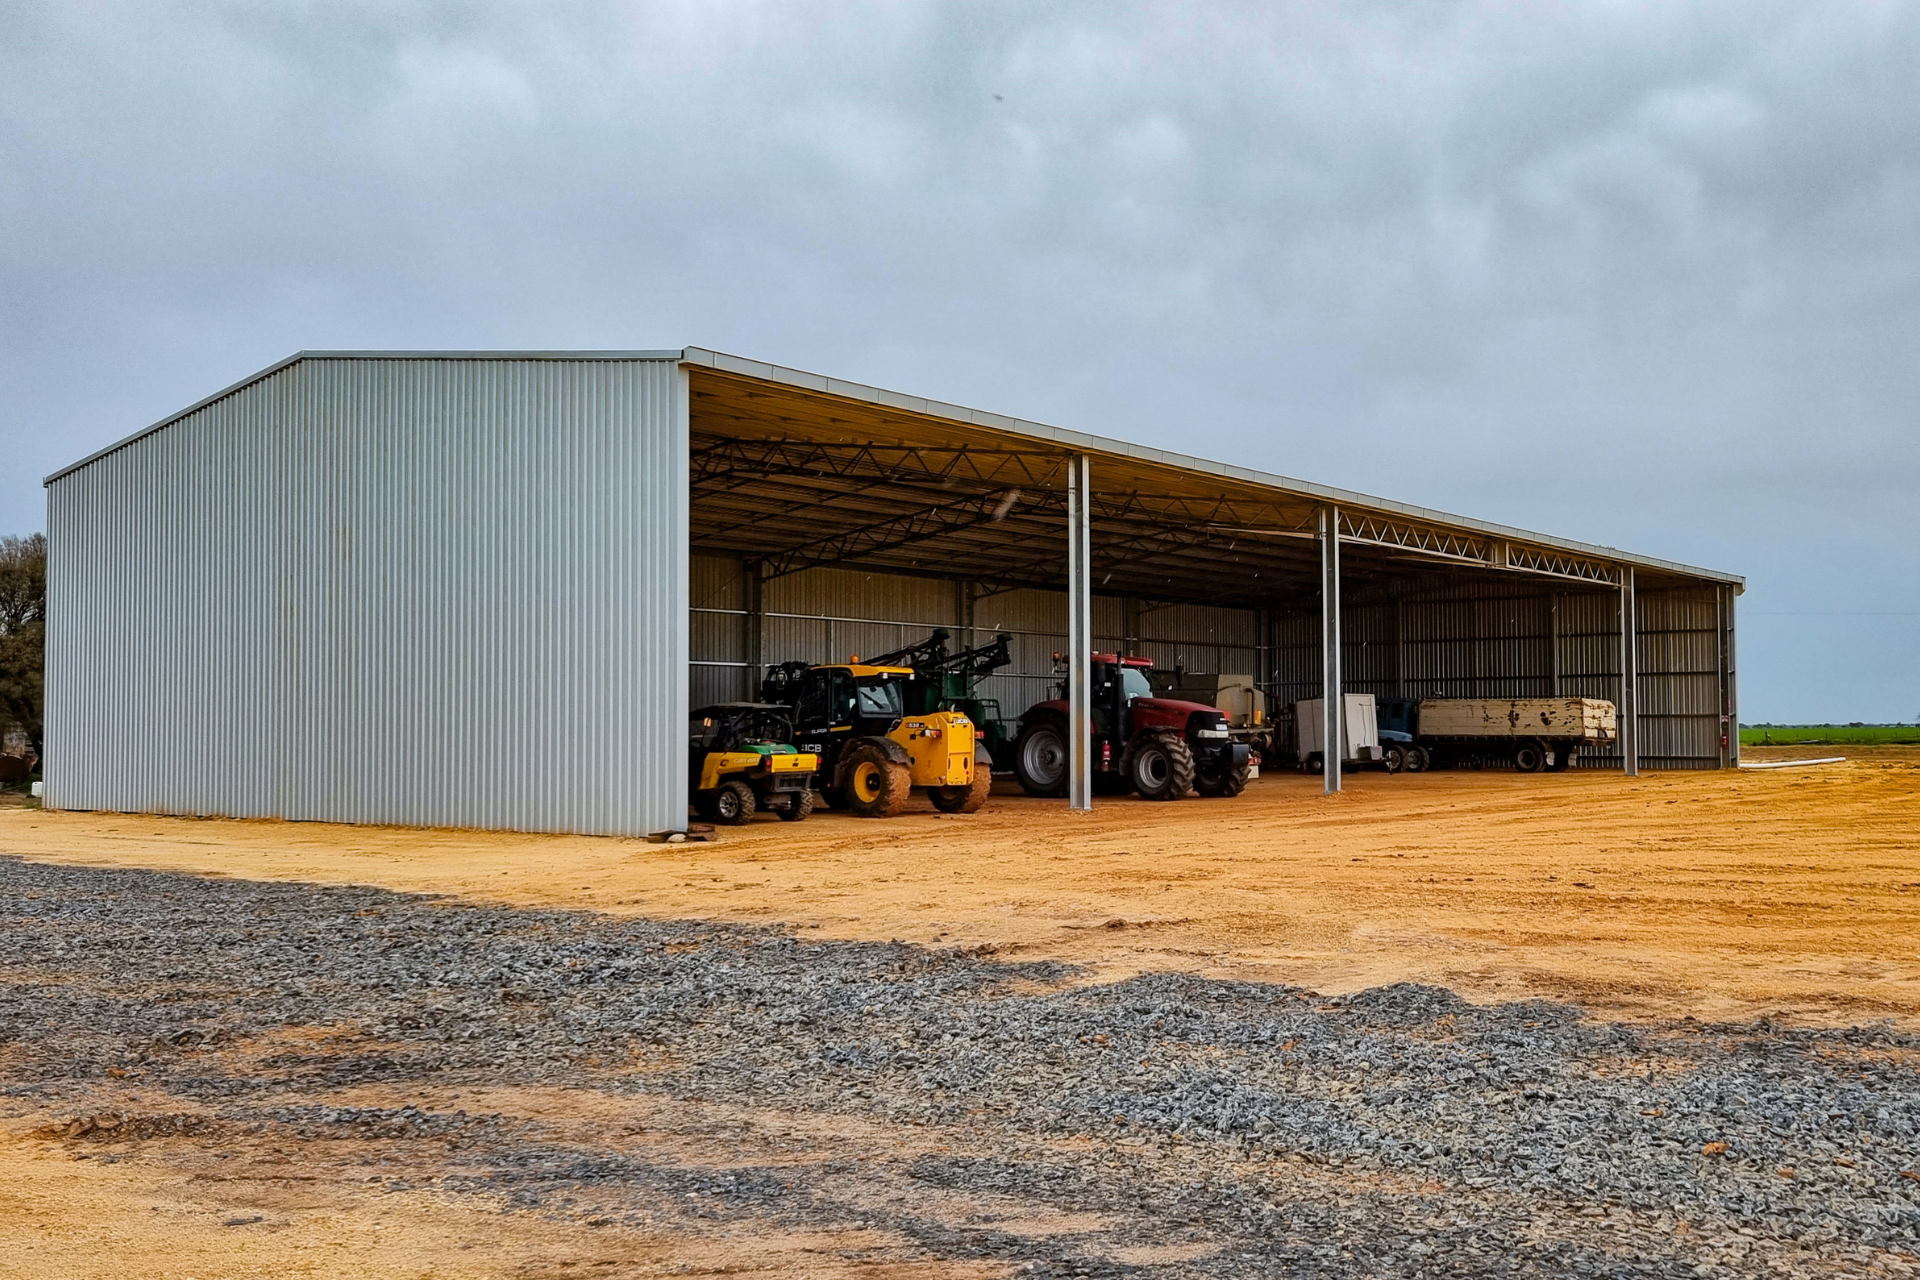 A 42.5m x 18m x 6m machinery shed at Nullawil VIC